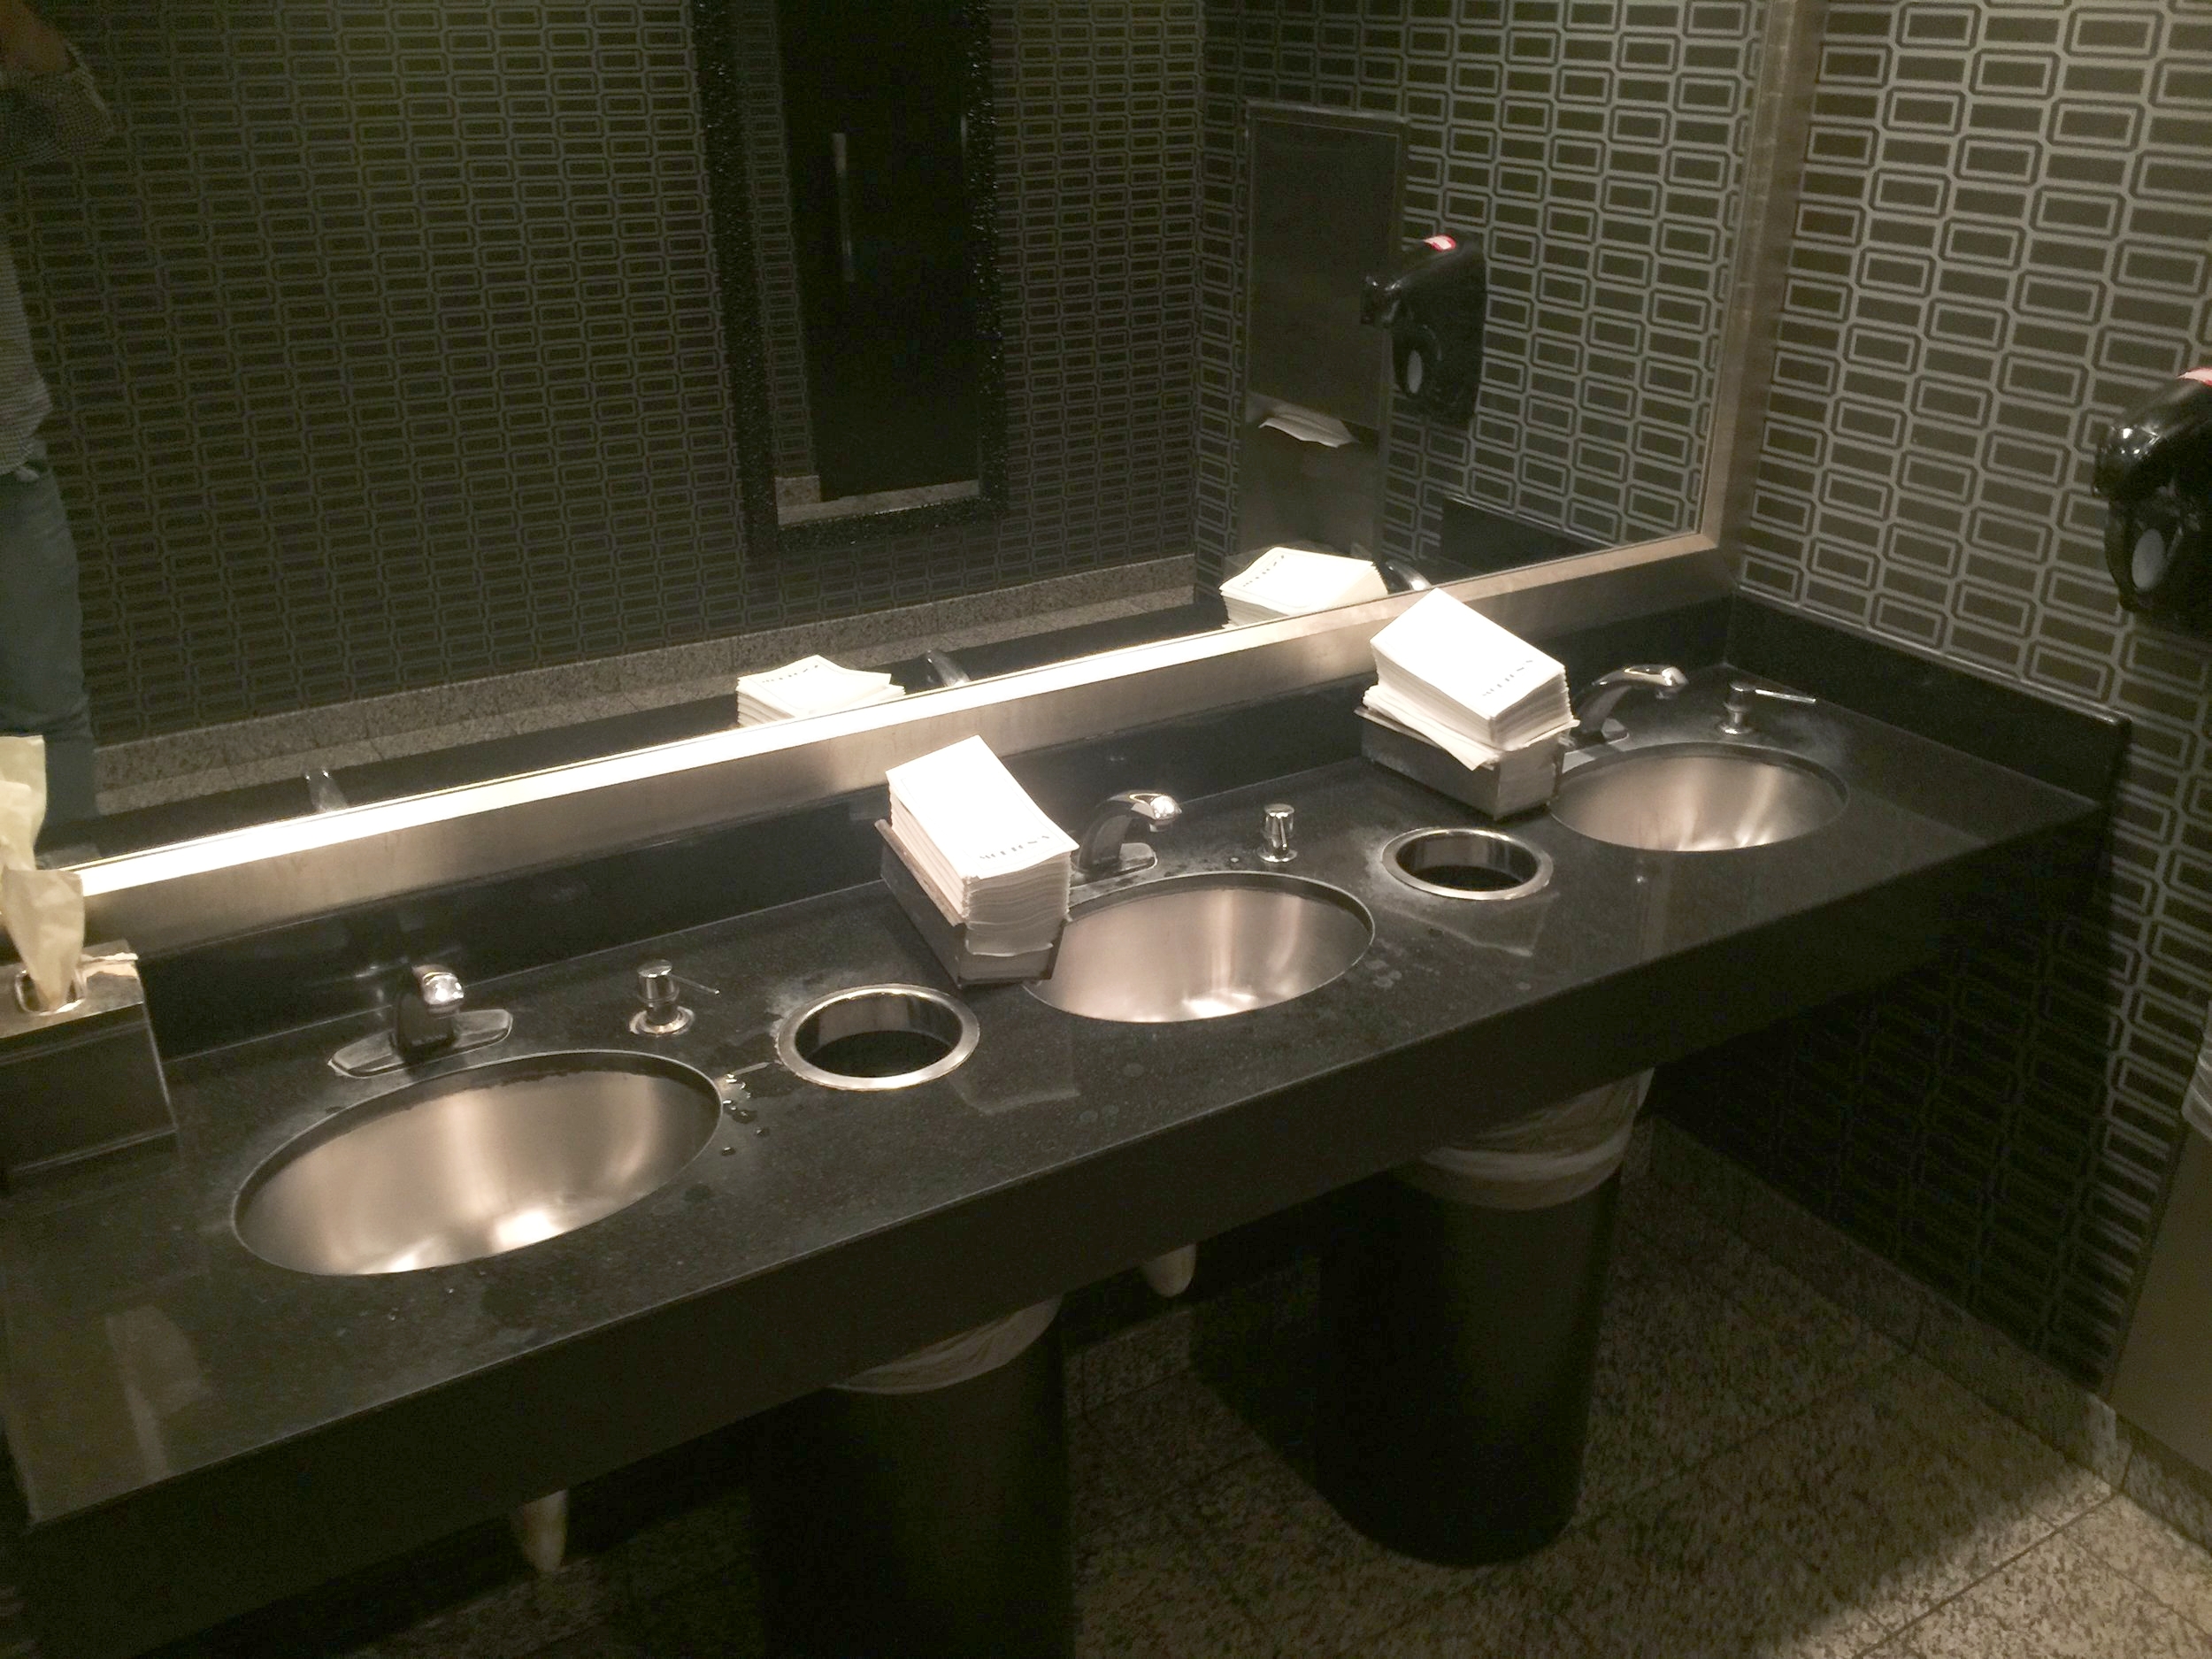  The men's room at Morton's Steakhouse where Scott was thinking of Don when suddenly two faucets turned on by themselves. 